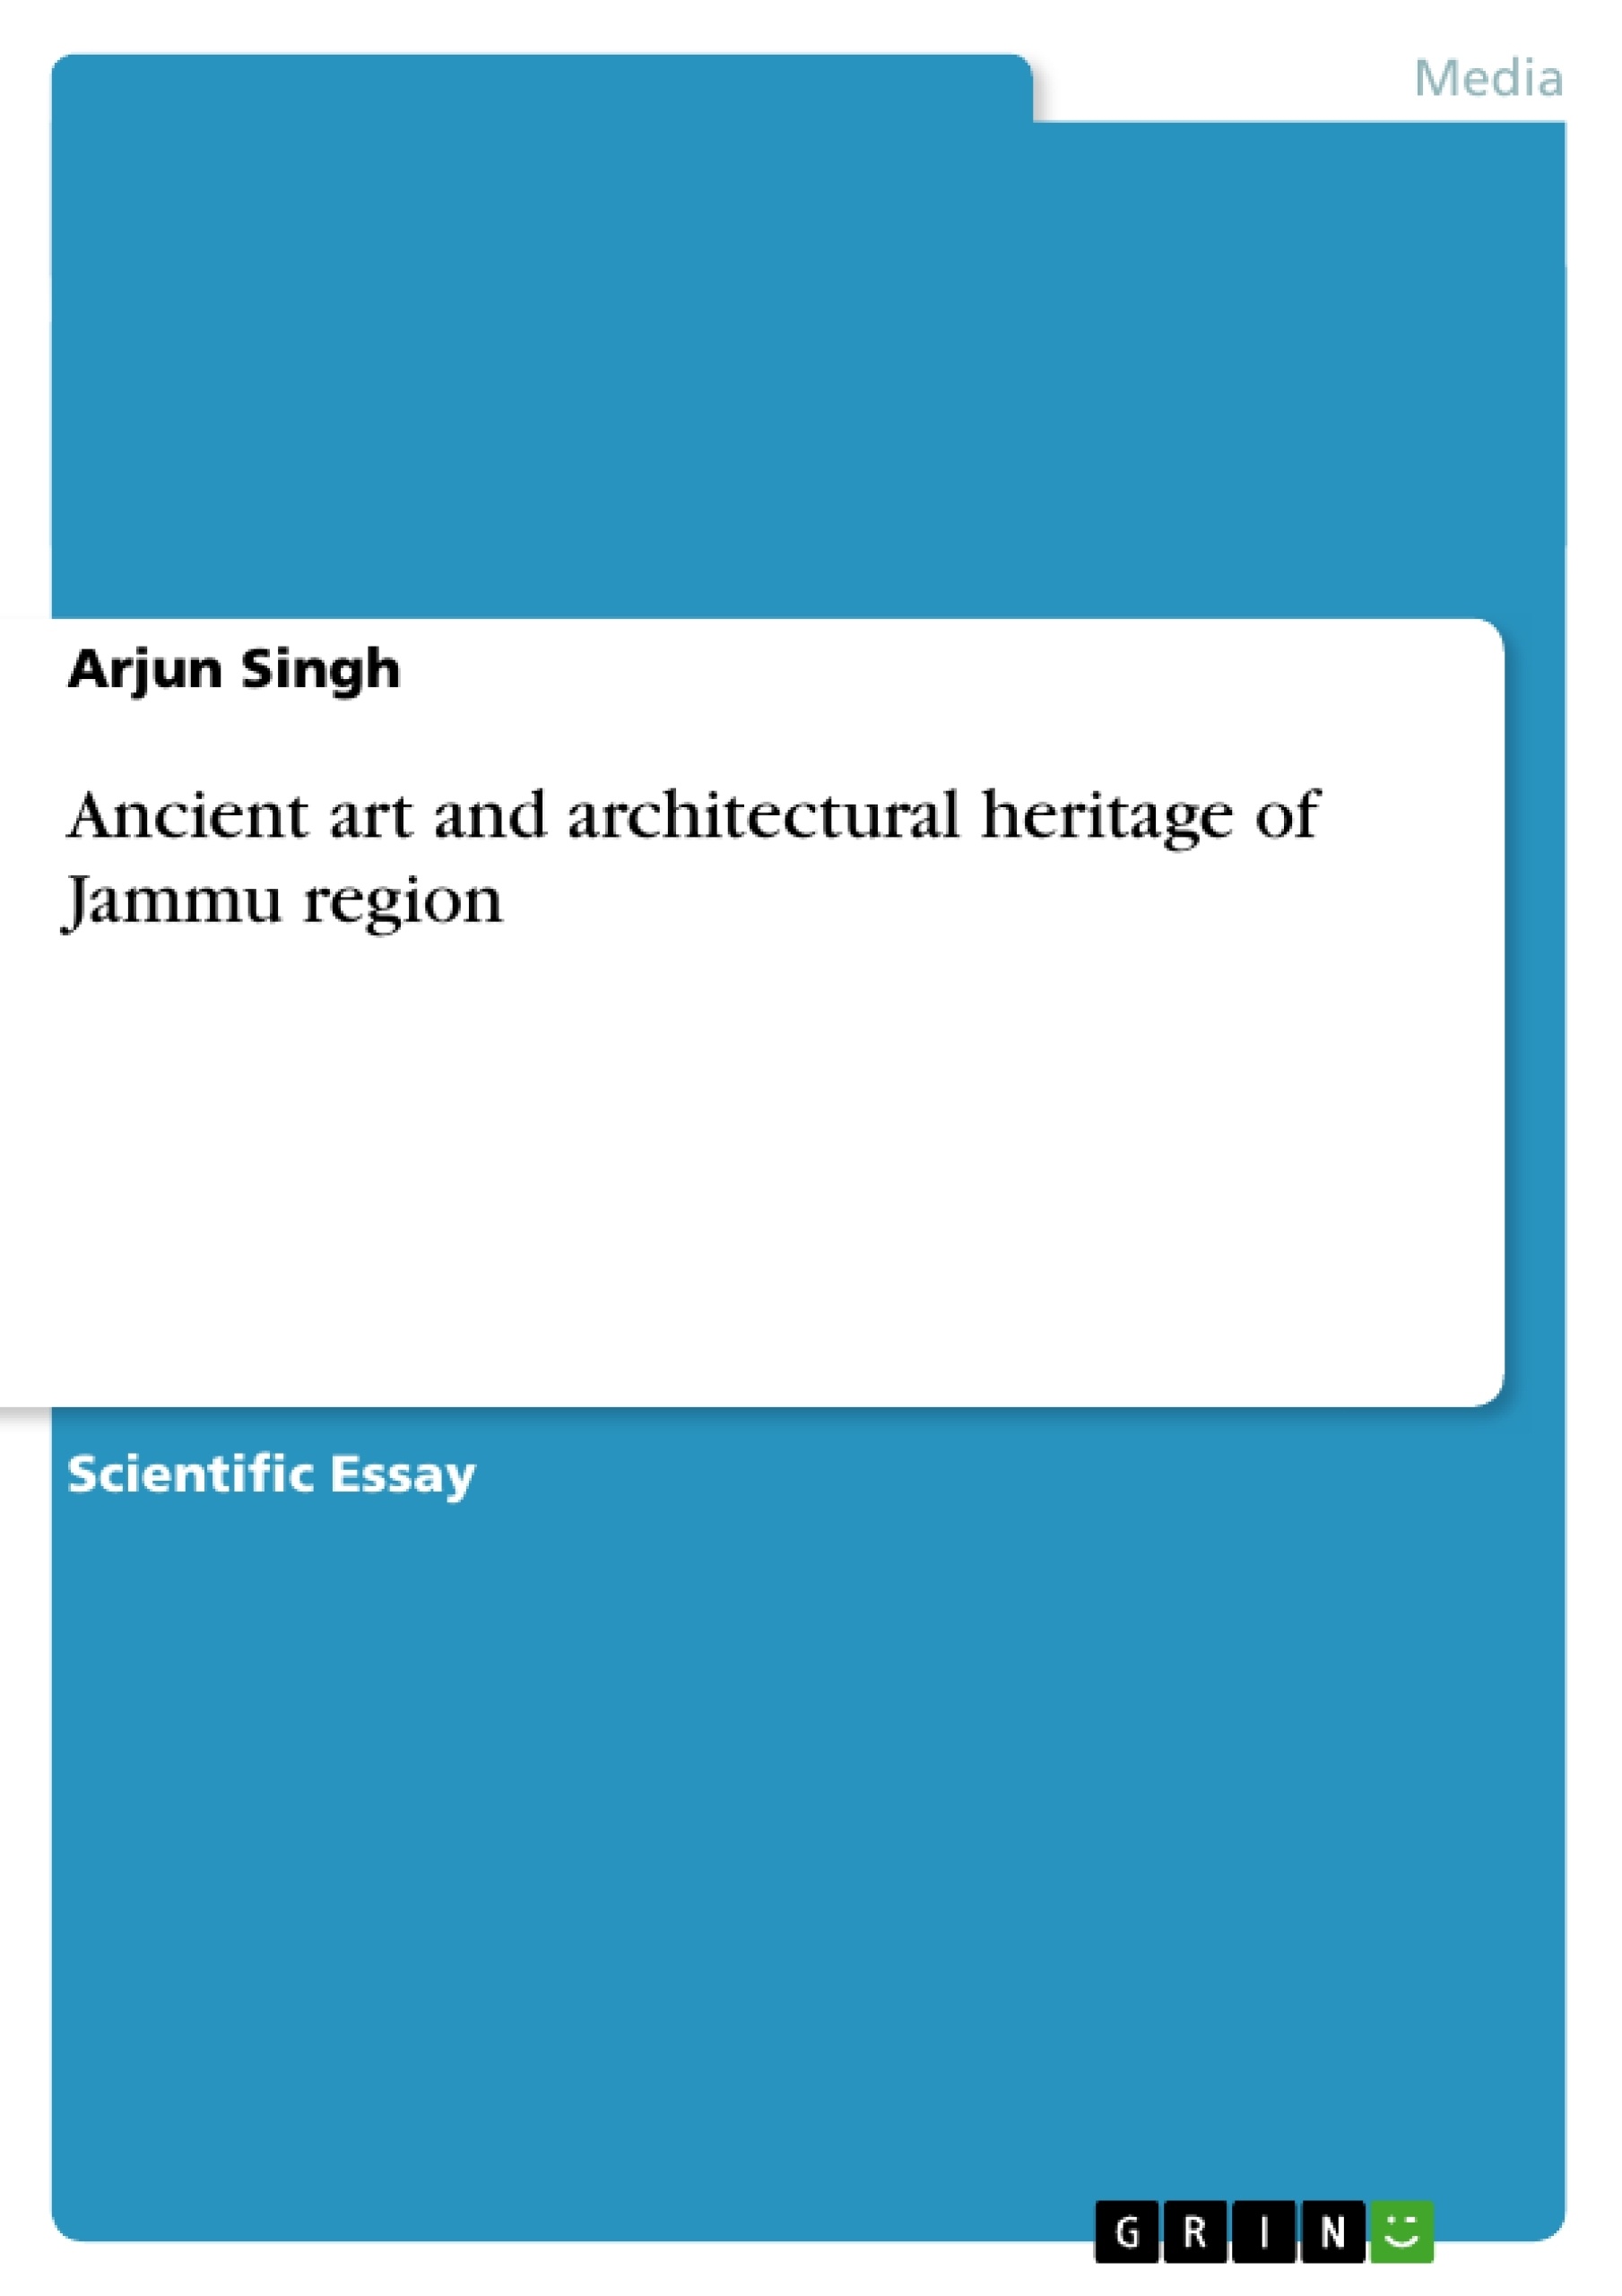 Title: Ancient art and architectural heritage of Jammu region